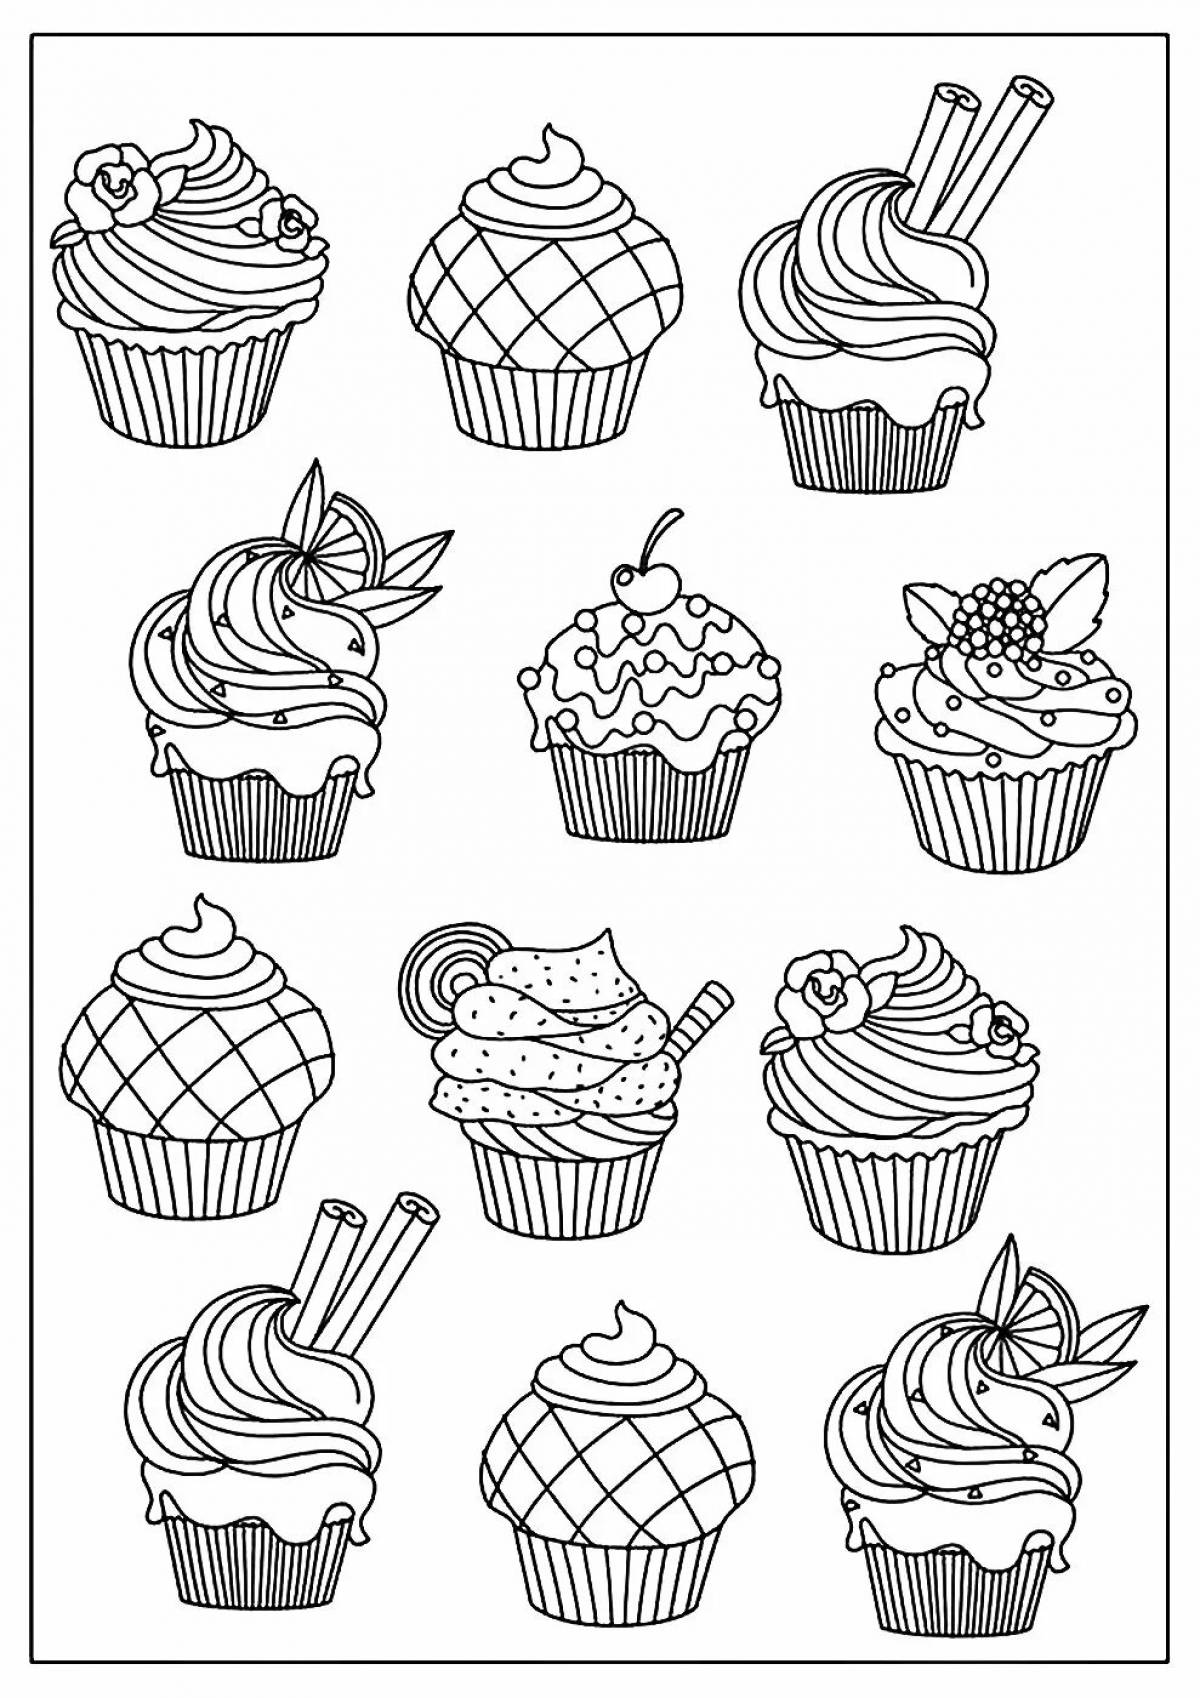 Coloring page of cupcakes in color package